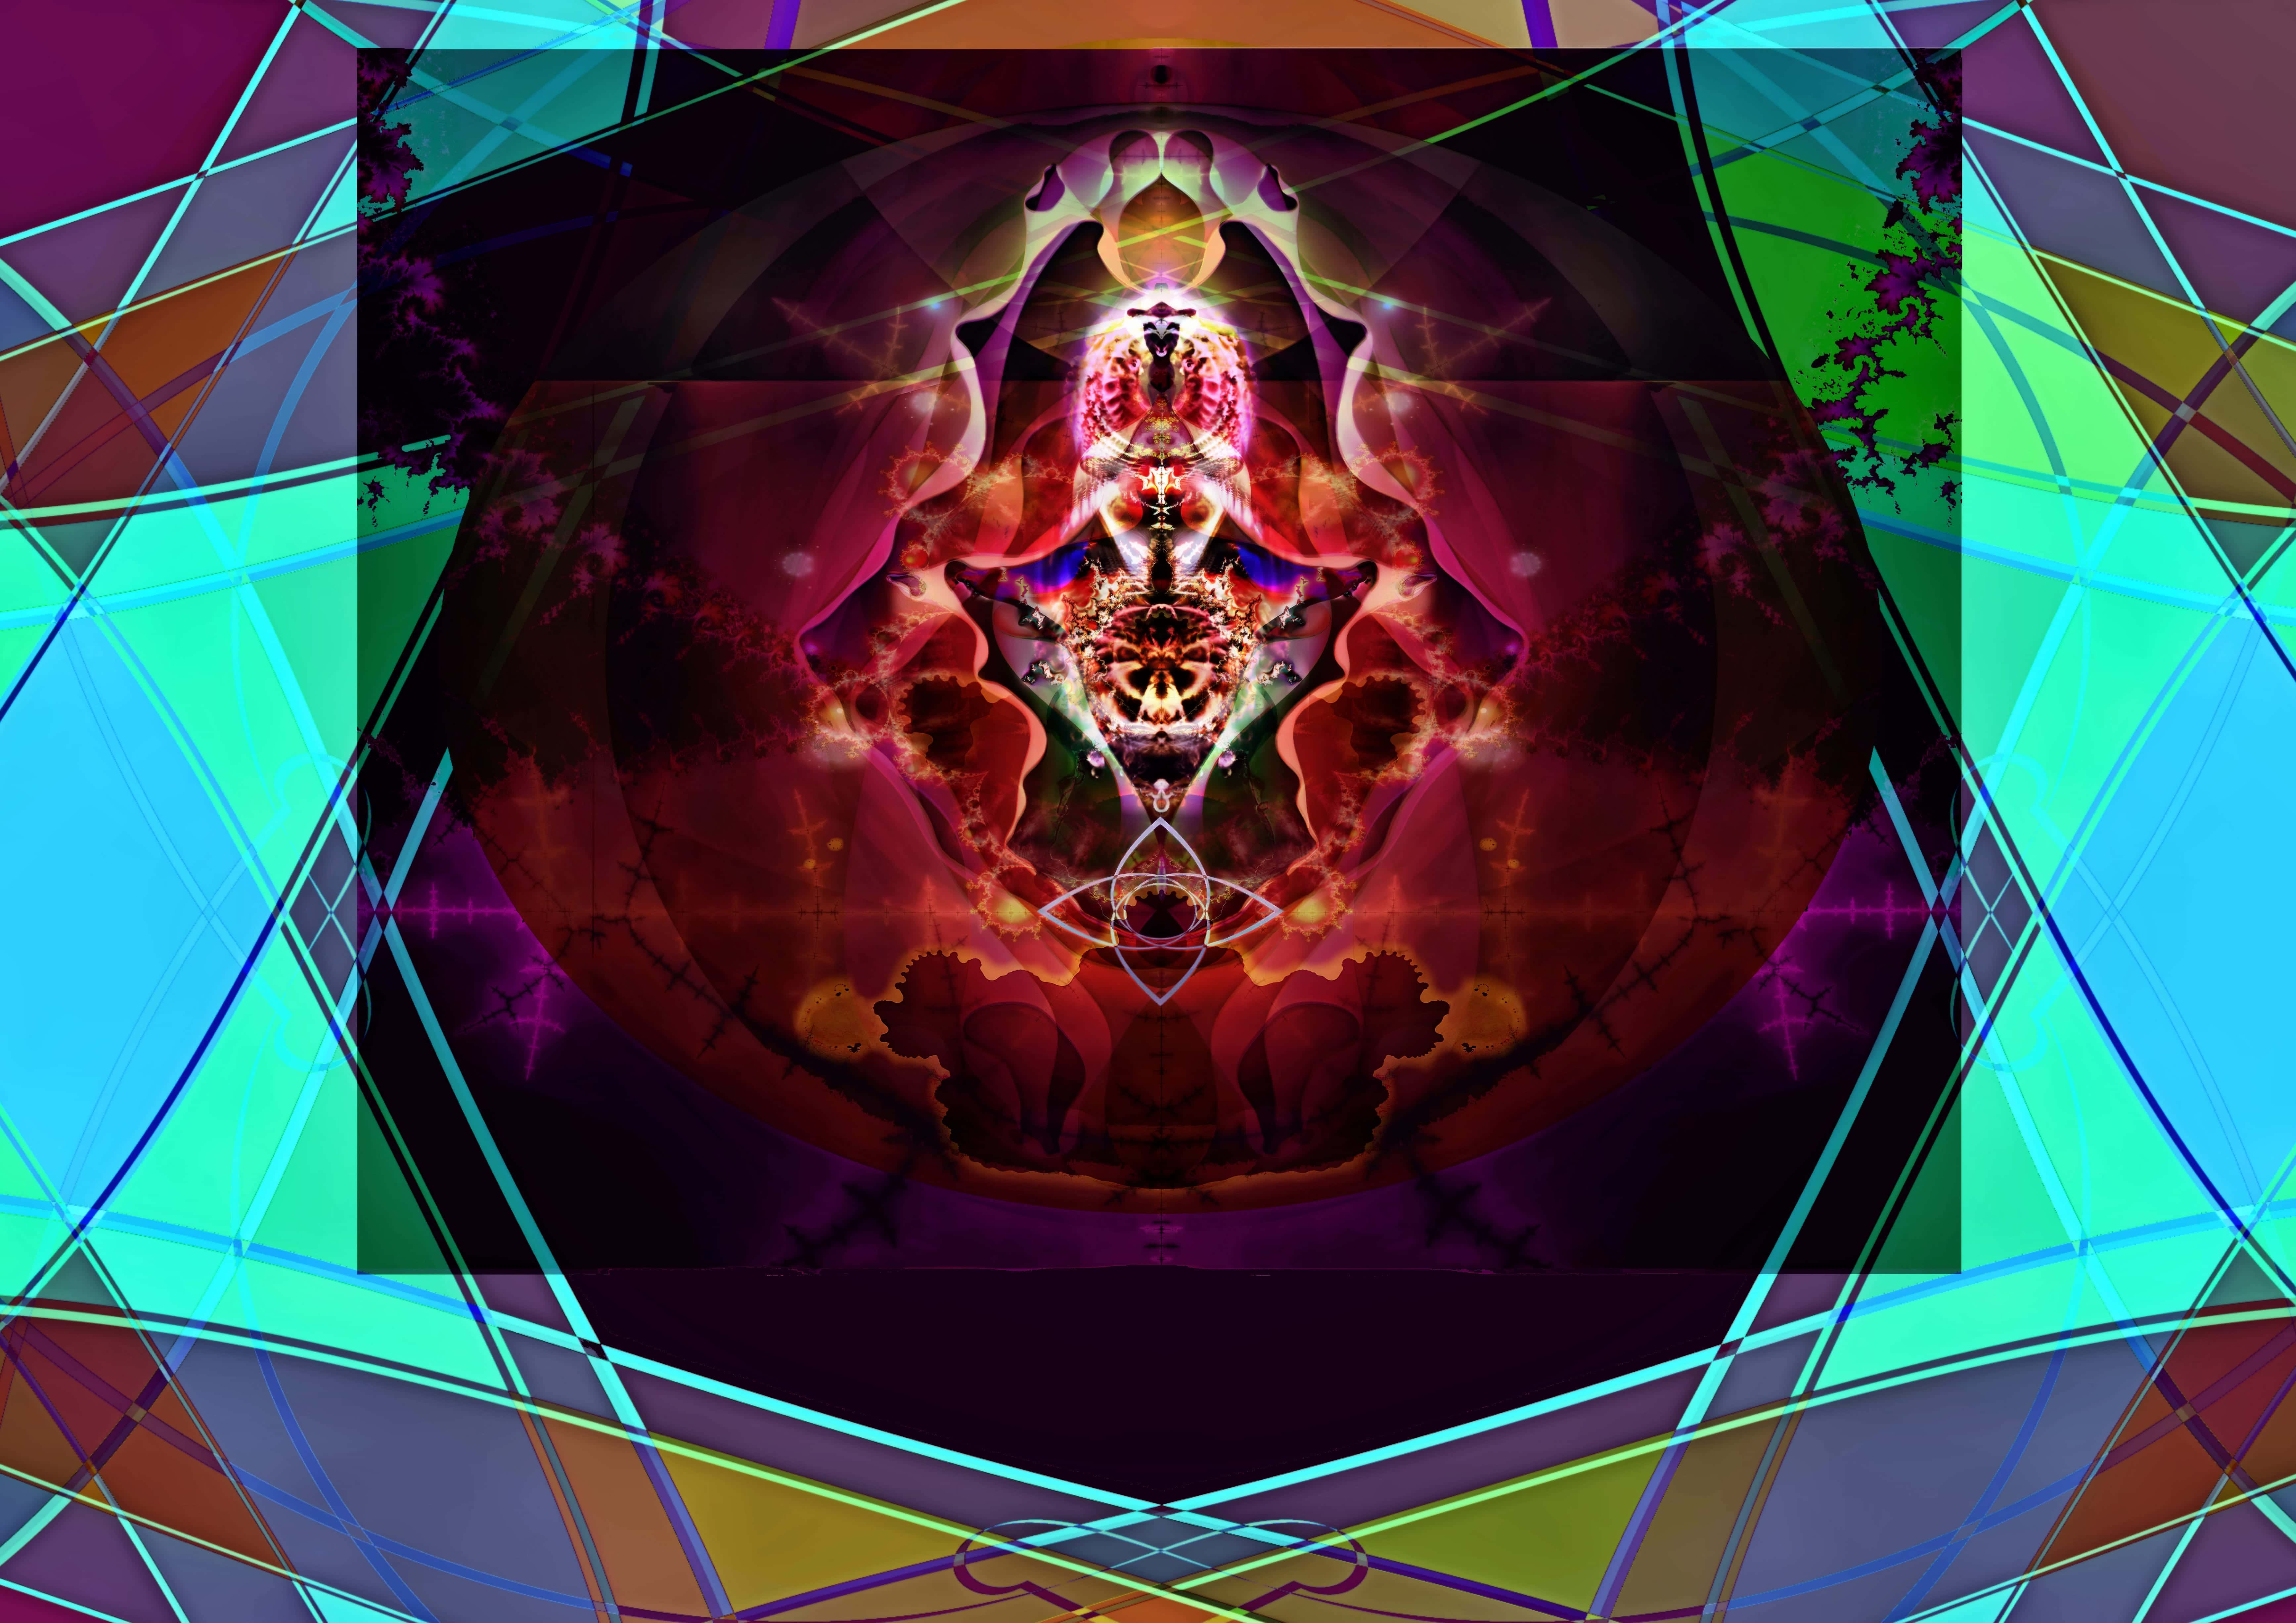 Fractal image of throne room with altar at center